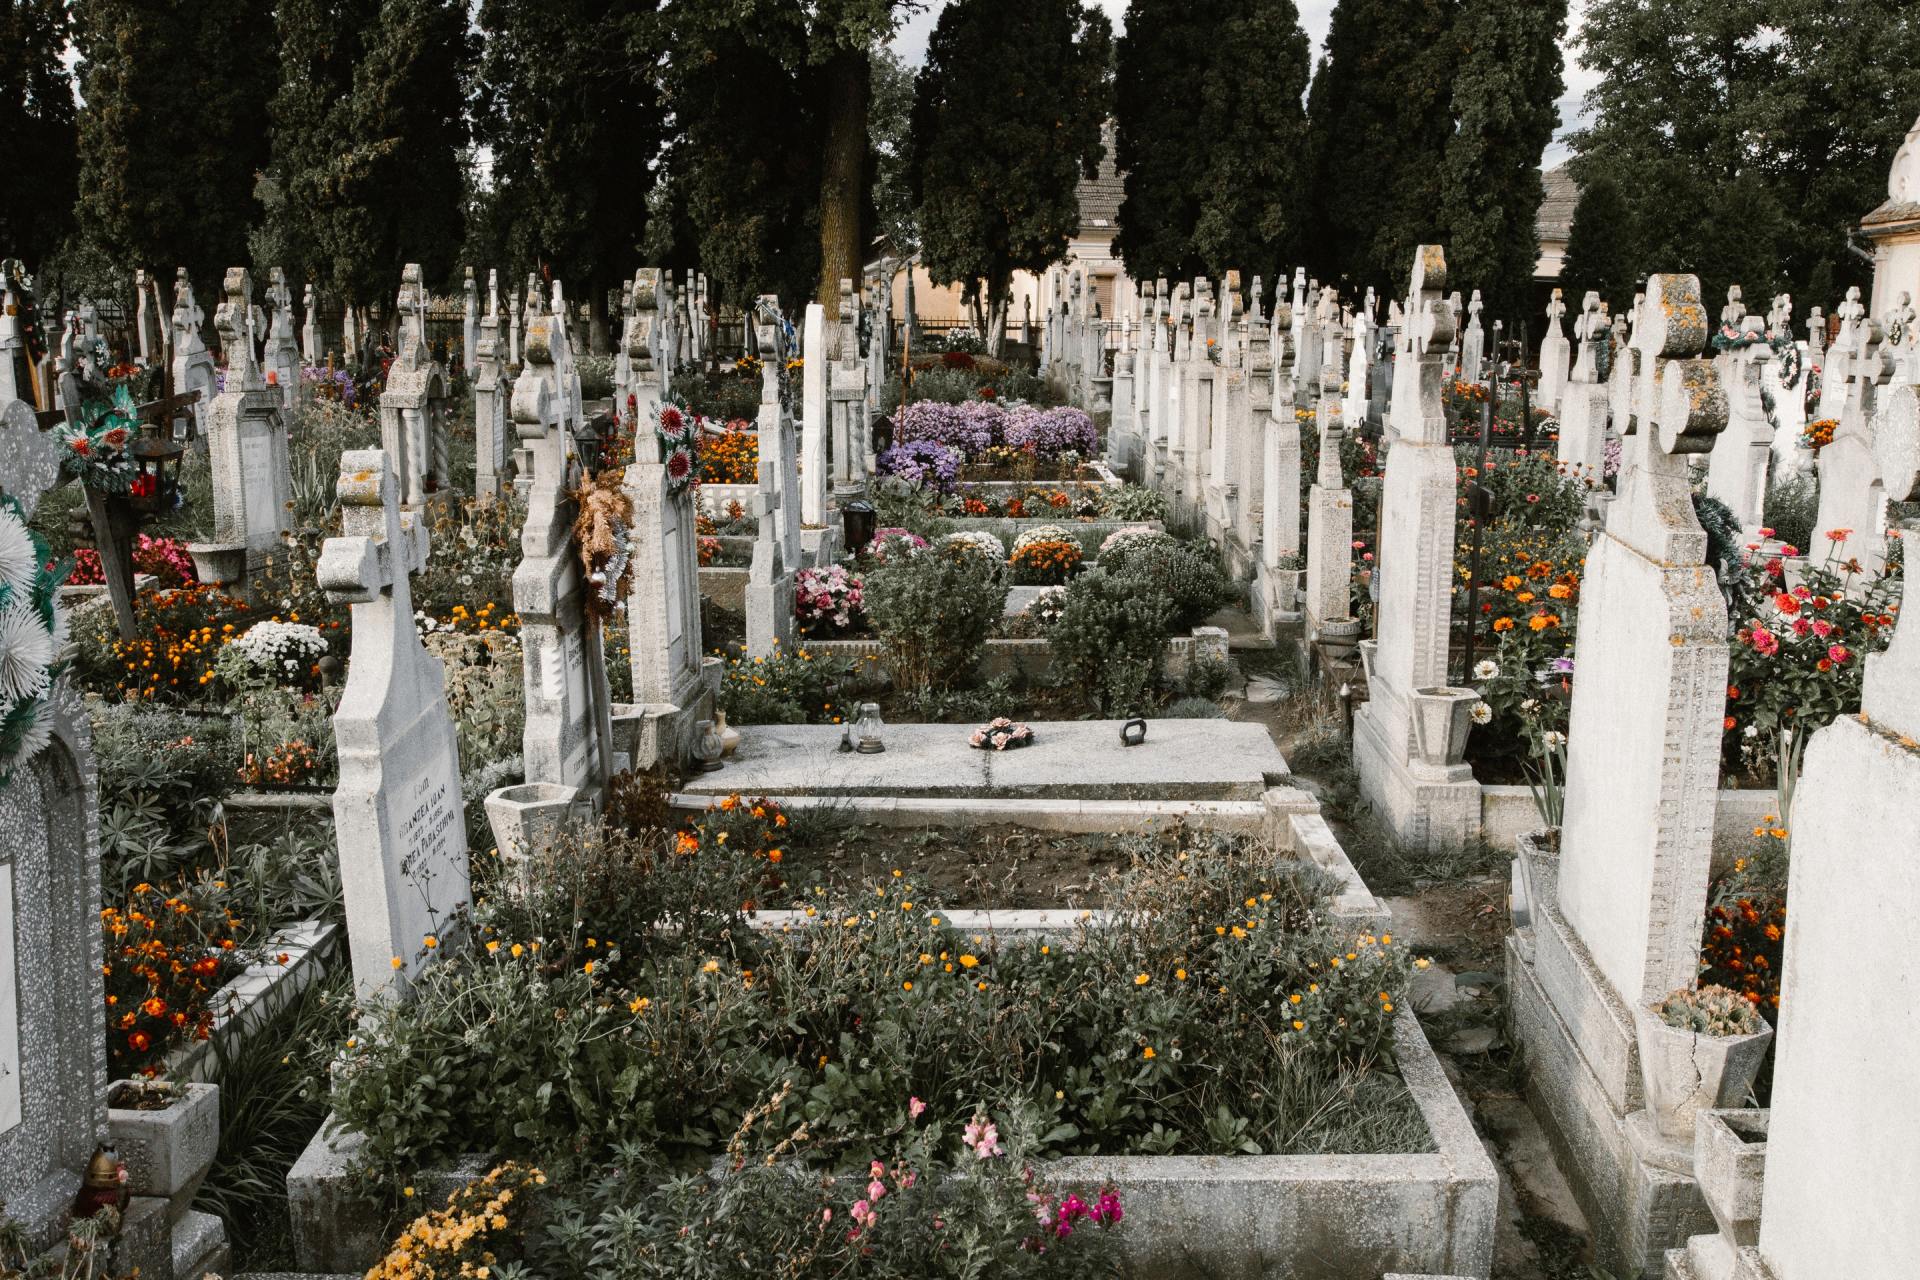 white rows of tombstones or gravestones show one way the dead are honored and buried